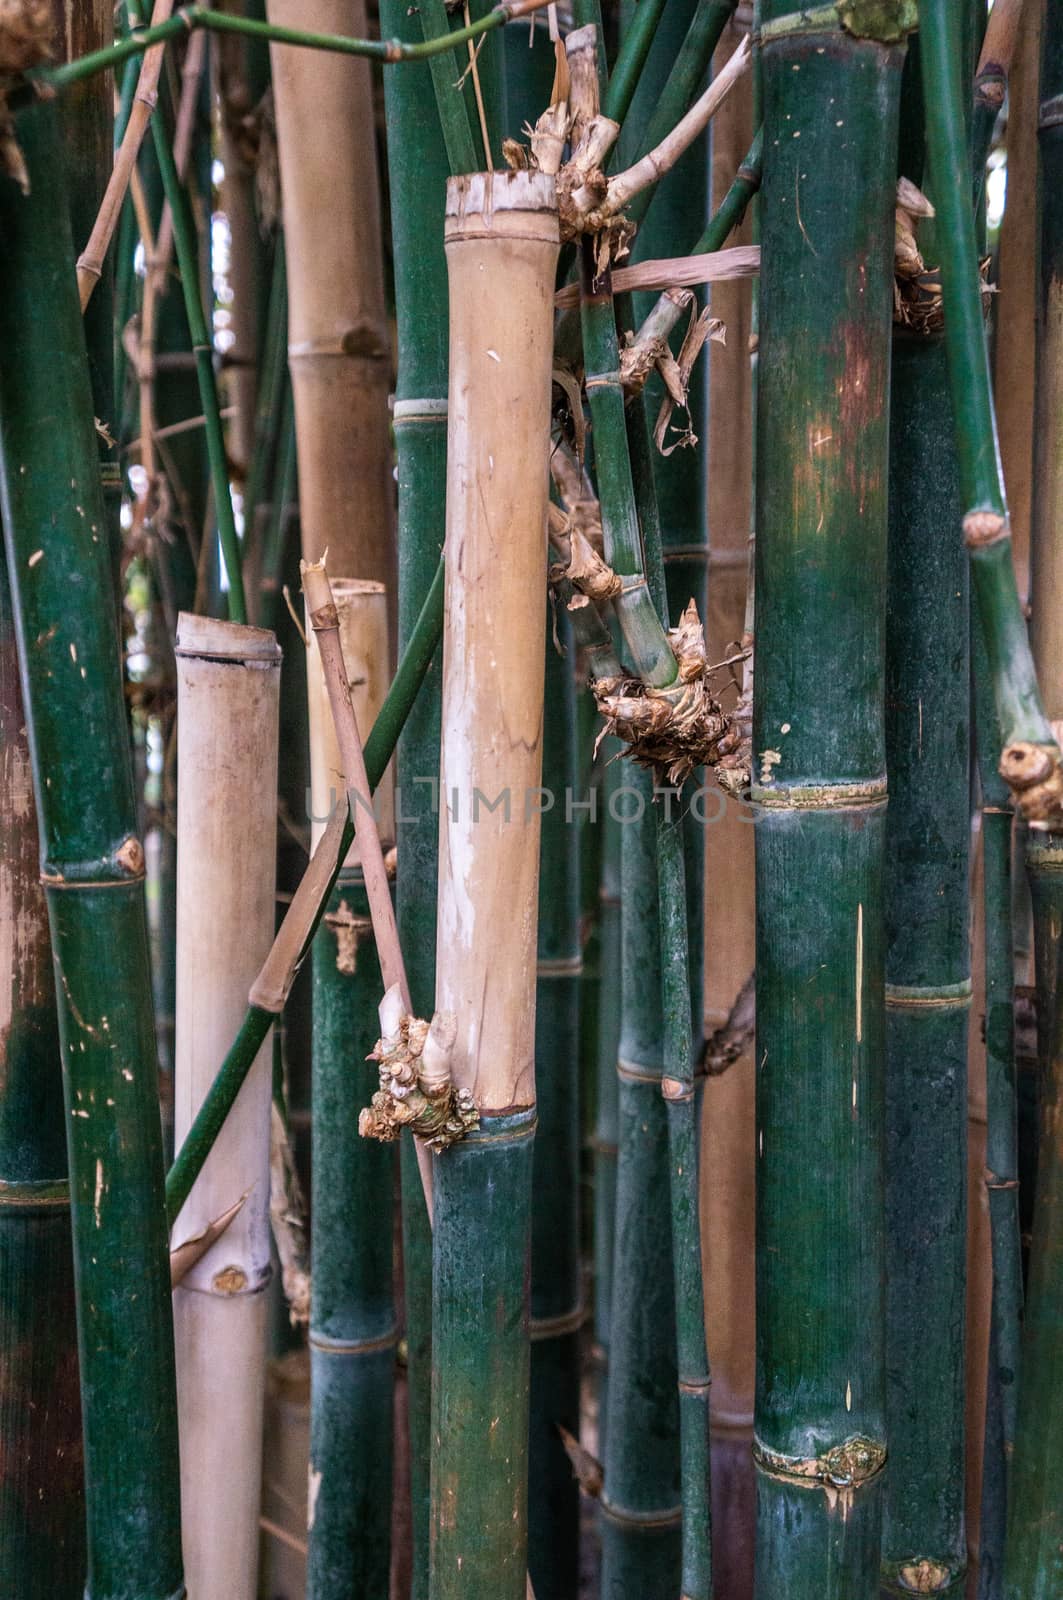 Dark green and beige bamboo jungle background scene. Abstract rainforest in natural light with vertical bamboo stalks at different depths.